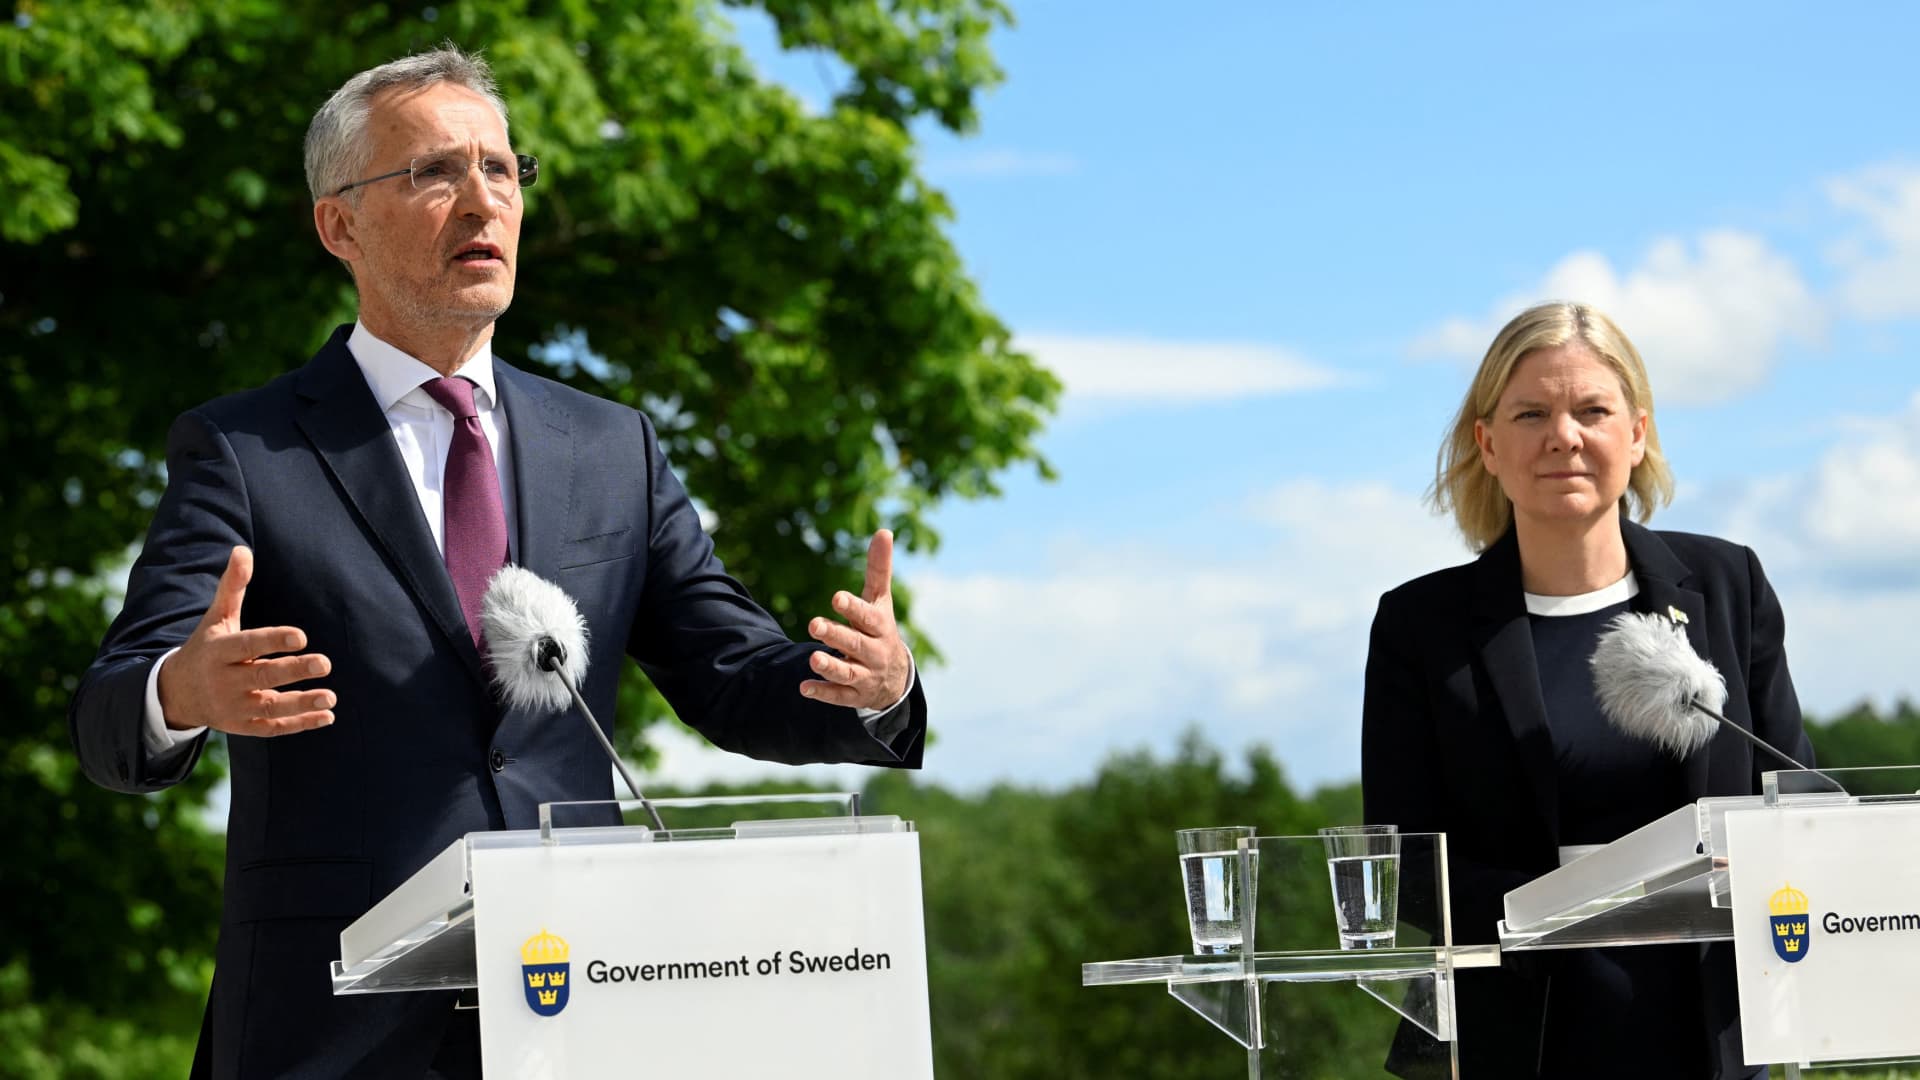 NATO Secretary General Jens Stoltenberg and Sweden's Prime Minister Magdalena Andersson give a news conference after their meeting, in Harpsund, Sweden, June 13, 2022.